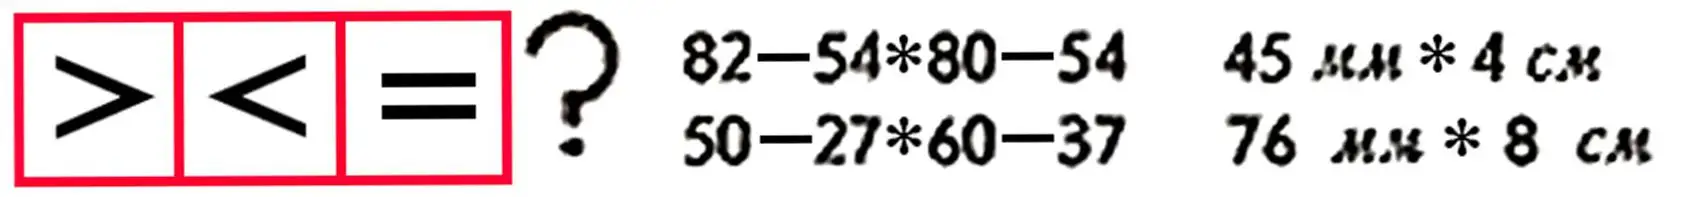 Comparison of numbers, signs